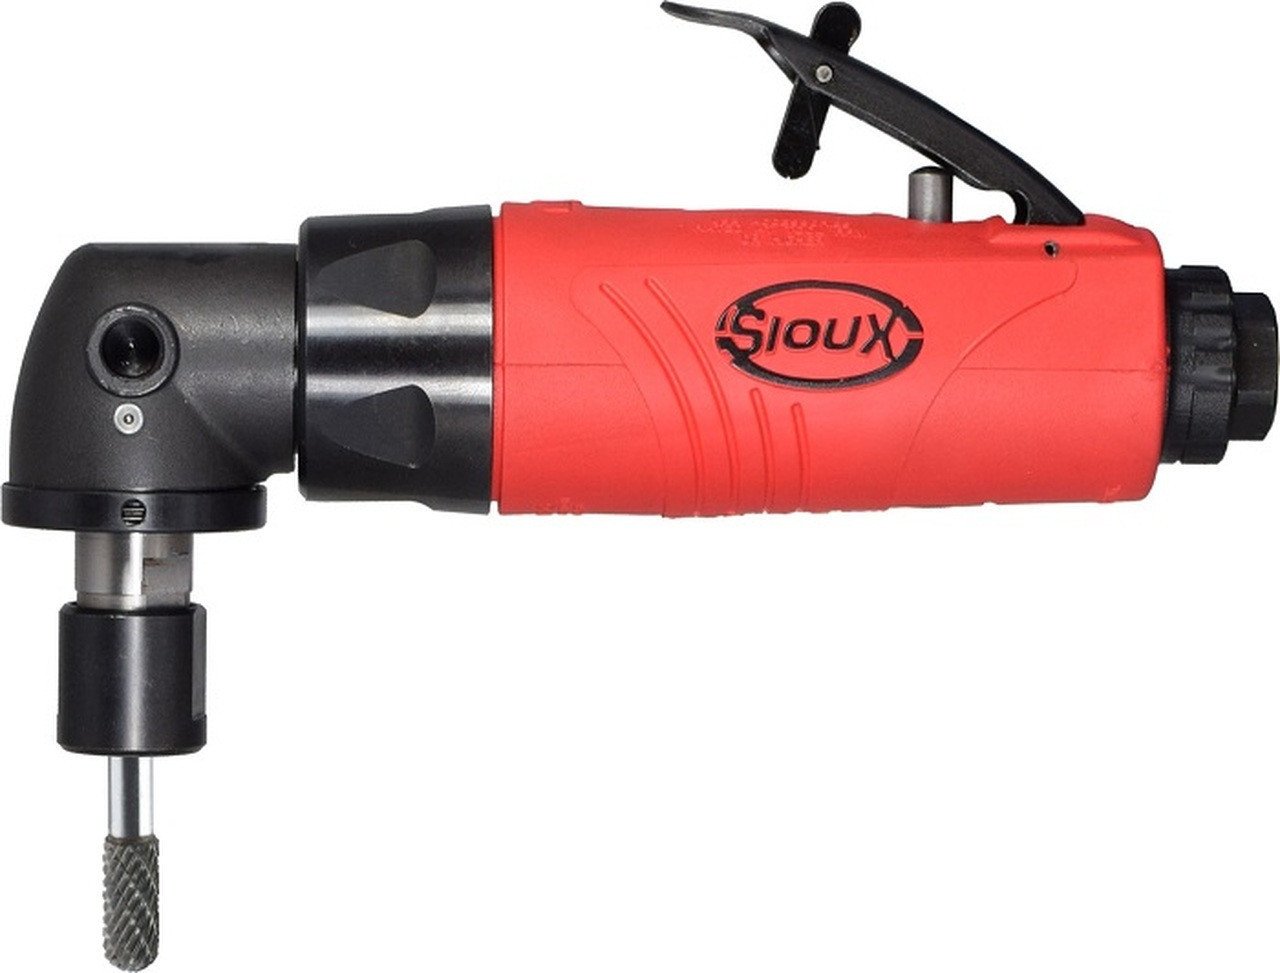 Sioux Tools SAG05S15M6S Right Angle Die Grinder | 0.5 HP | 15000 RPM | 300 Series Collet | Rear Exhaust